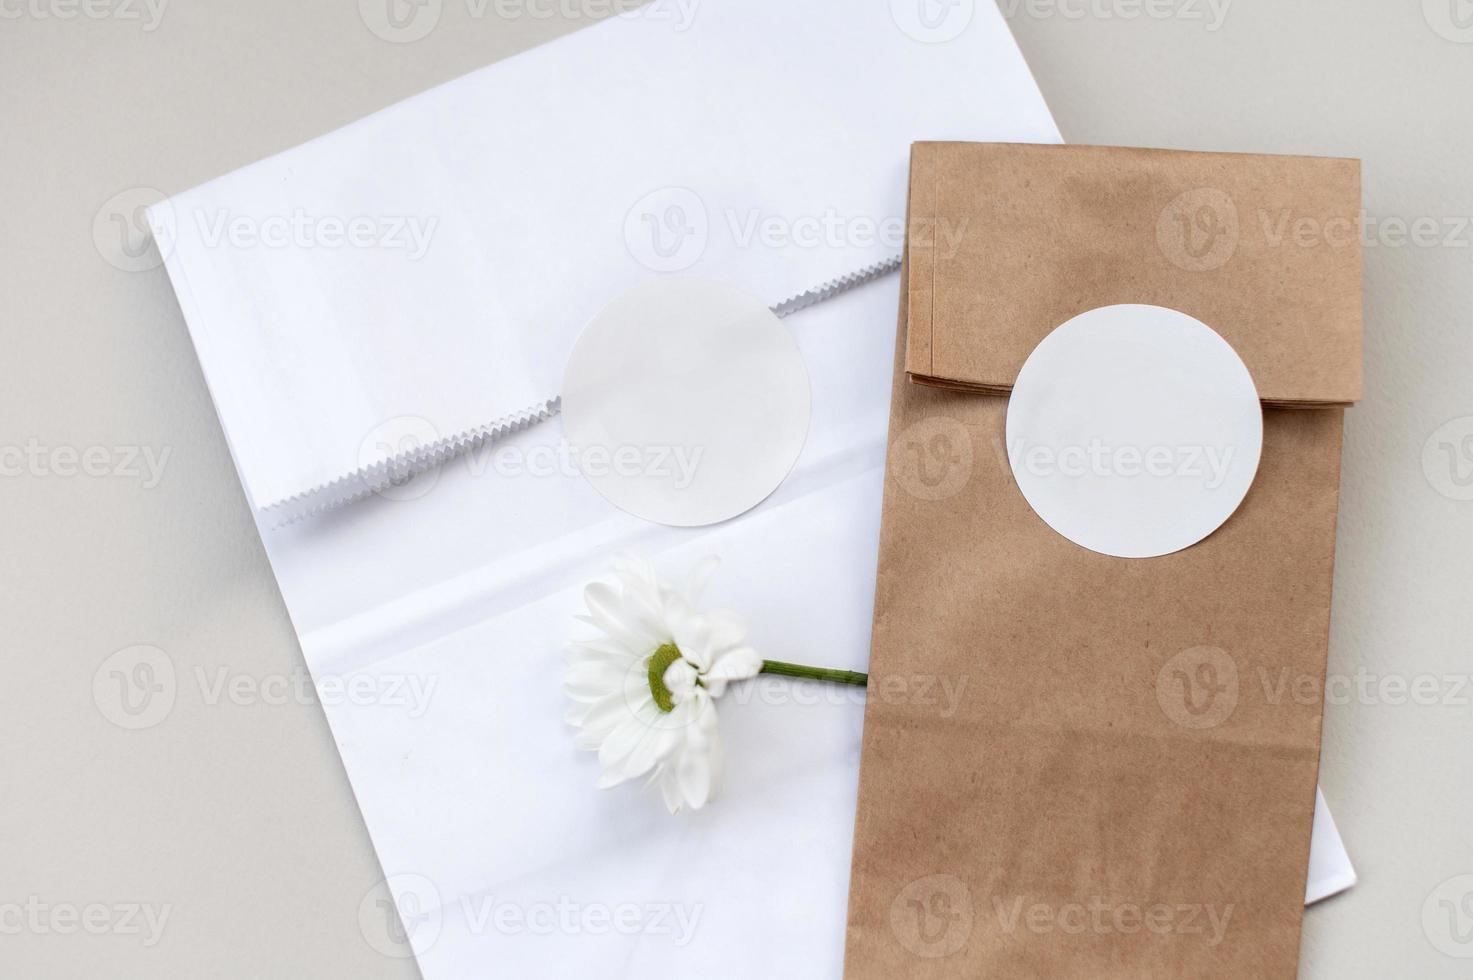 Round sticker mockup on gift white and kraft package, envelope with blank sticker, adhesive label photo